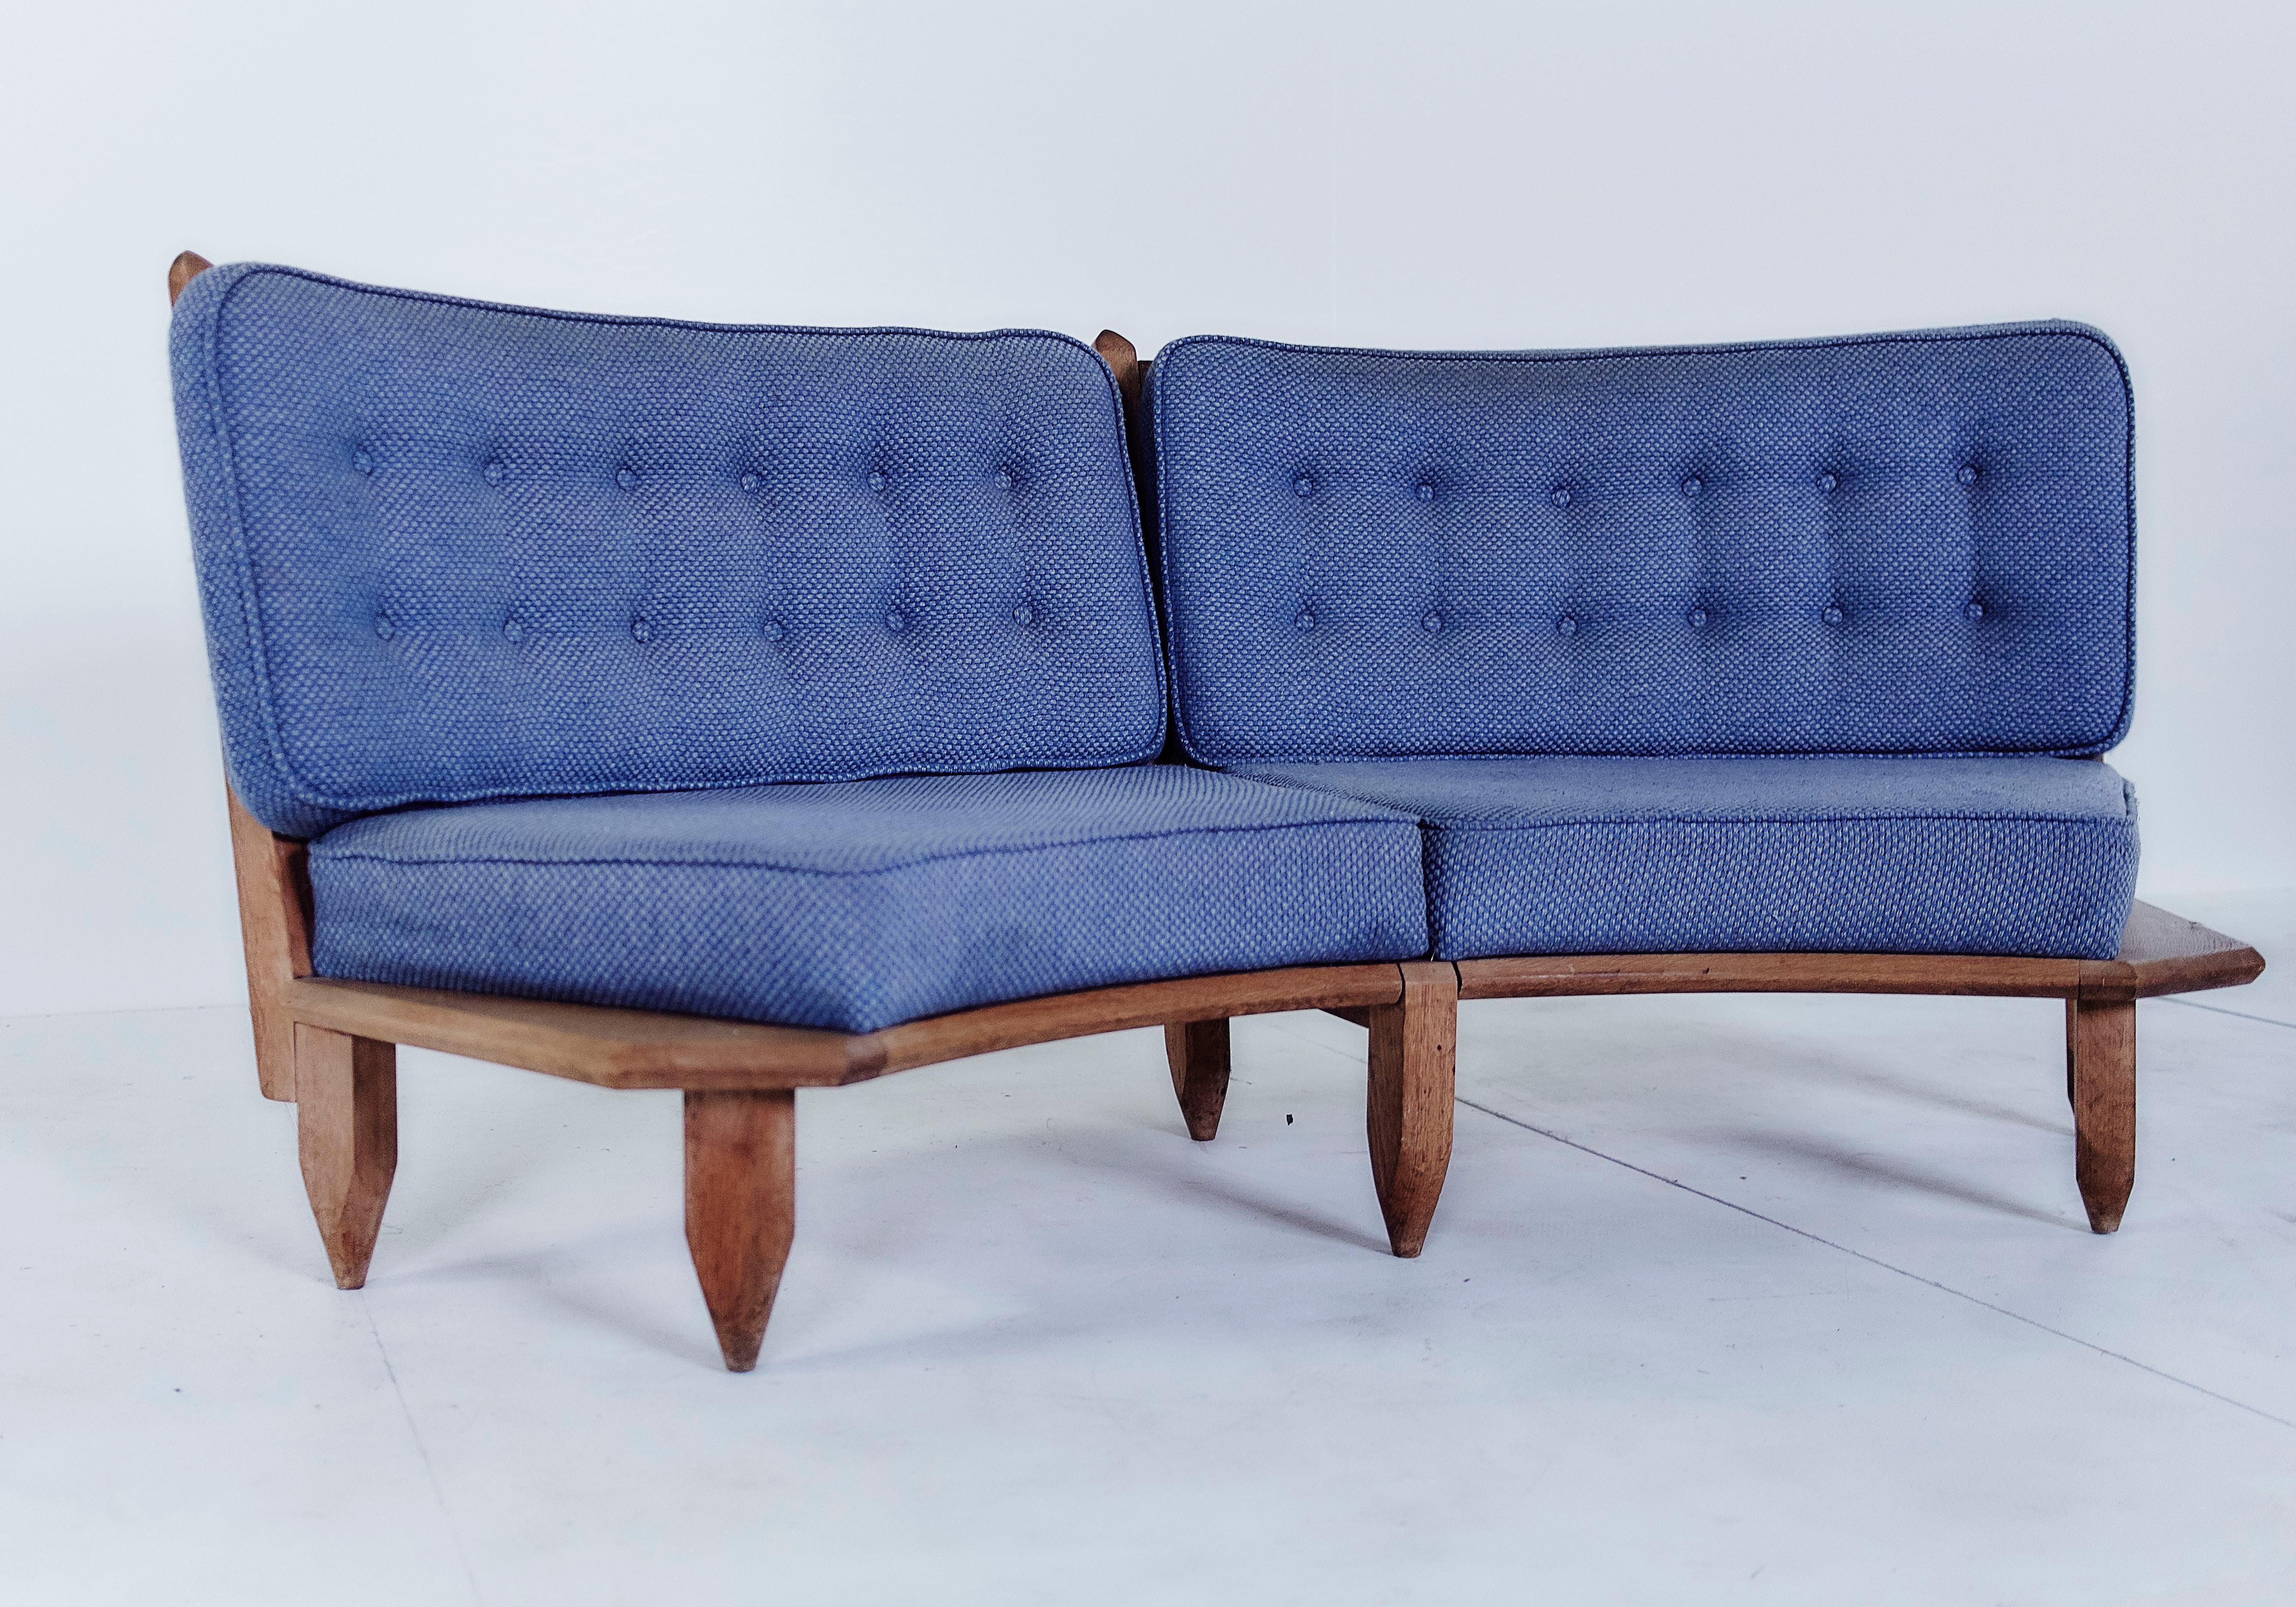 Curved sofa model, solid oak and original fabric, by Guillerme et Chambron, France, 1960.

The duo is known for their high-quality solid oak furniture.

Robert Guillerme (1913-1990) and Jacques Chambron (1914-2001).
Their company, Votre Maison,